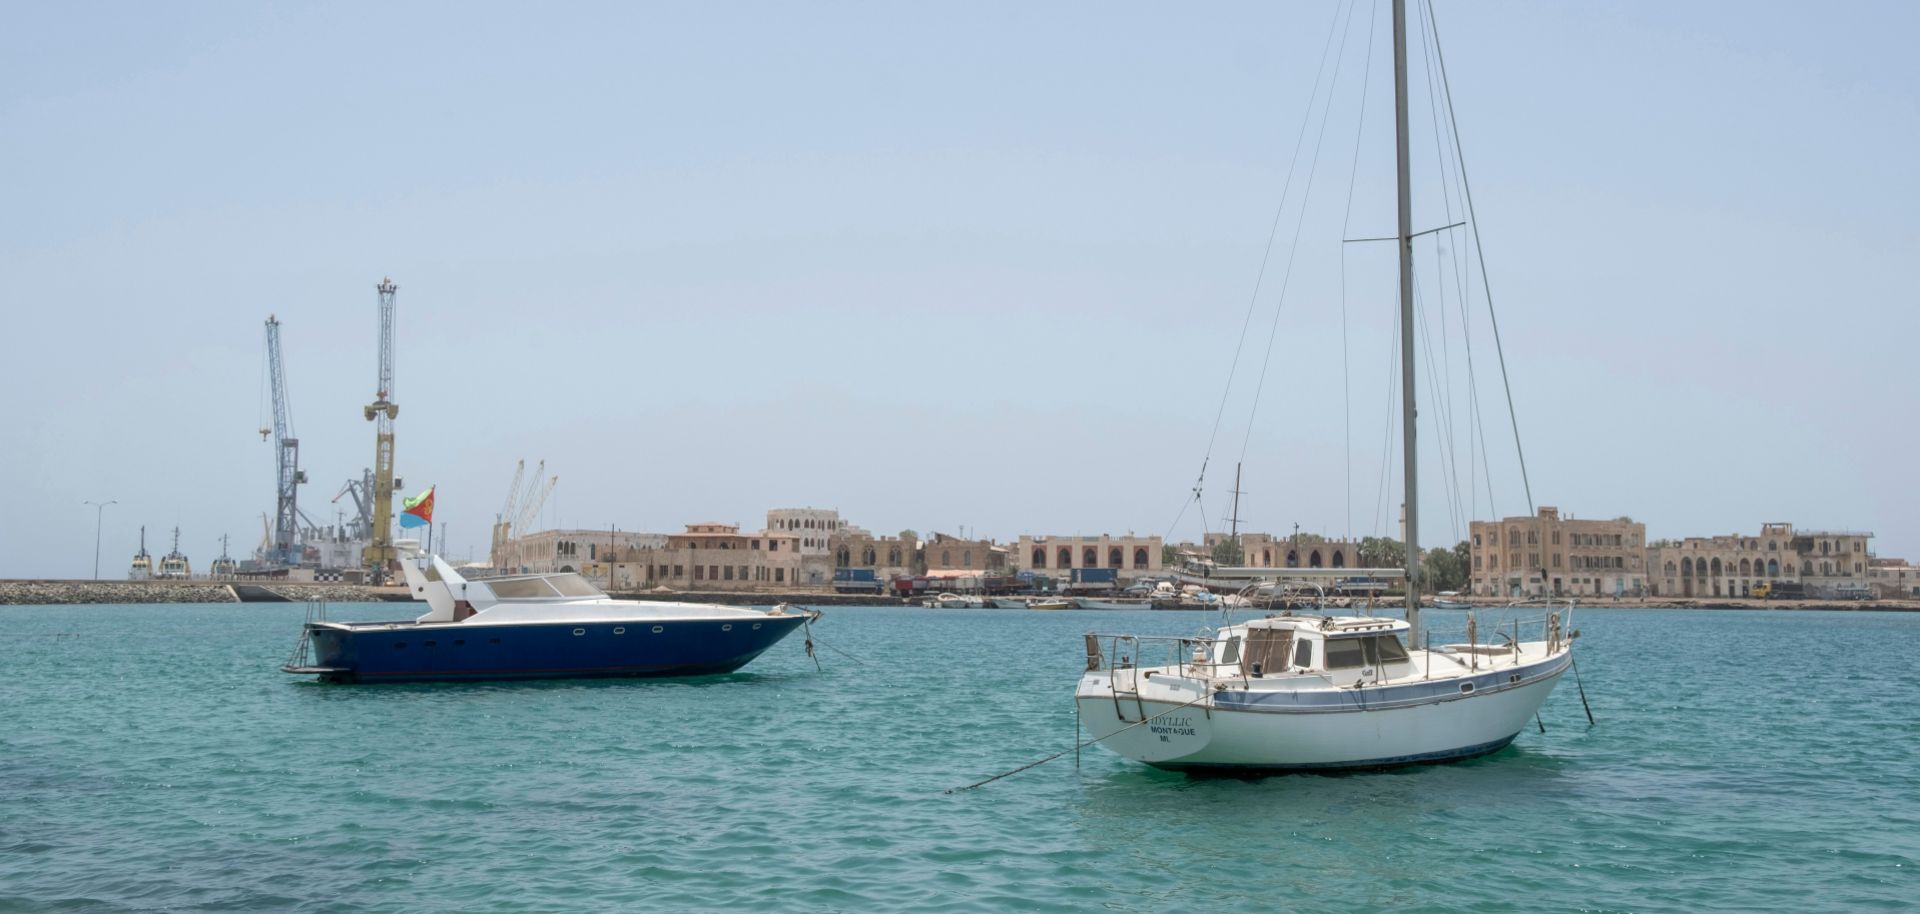 The harbor in Massawa shows some of what Eritrea has to offer to investors as a transportation hub and tourism magnet.